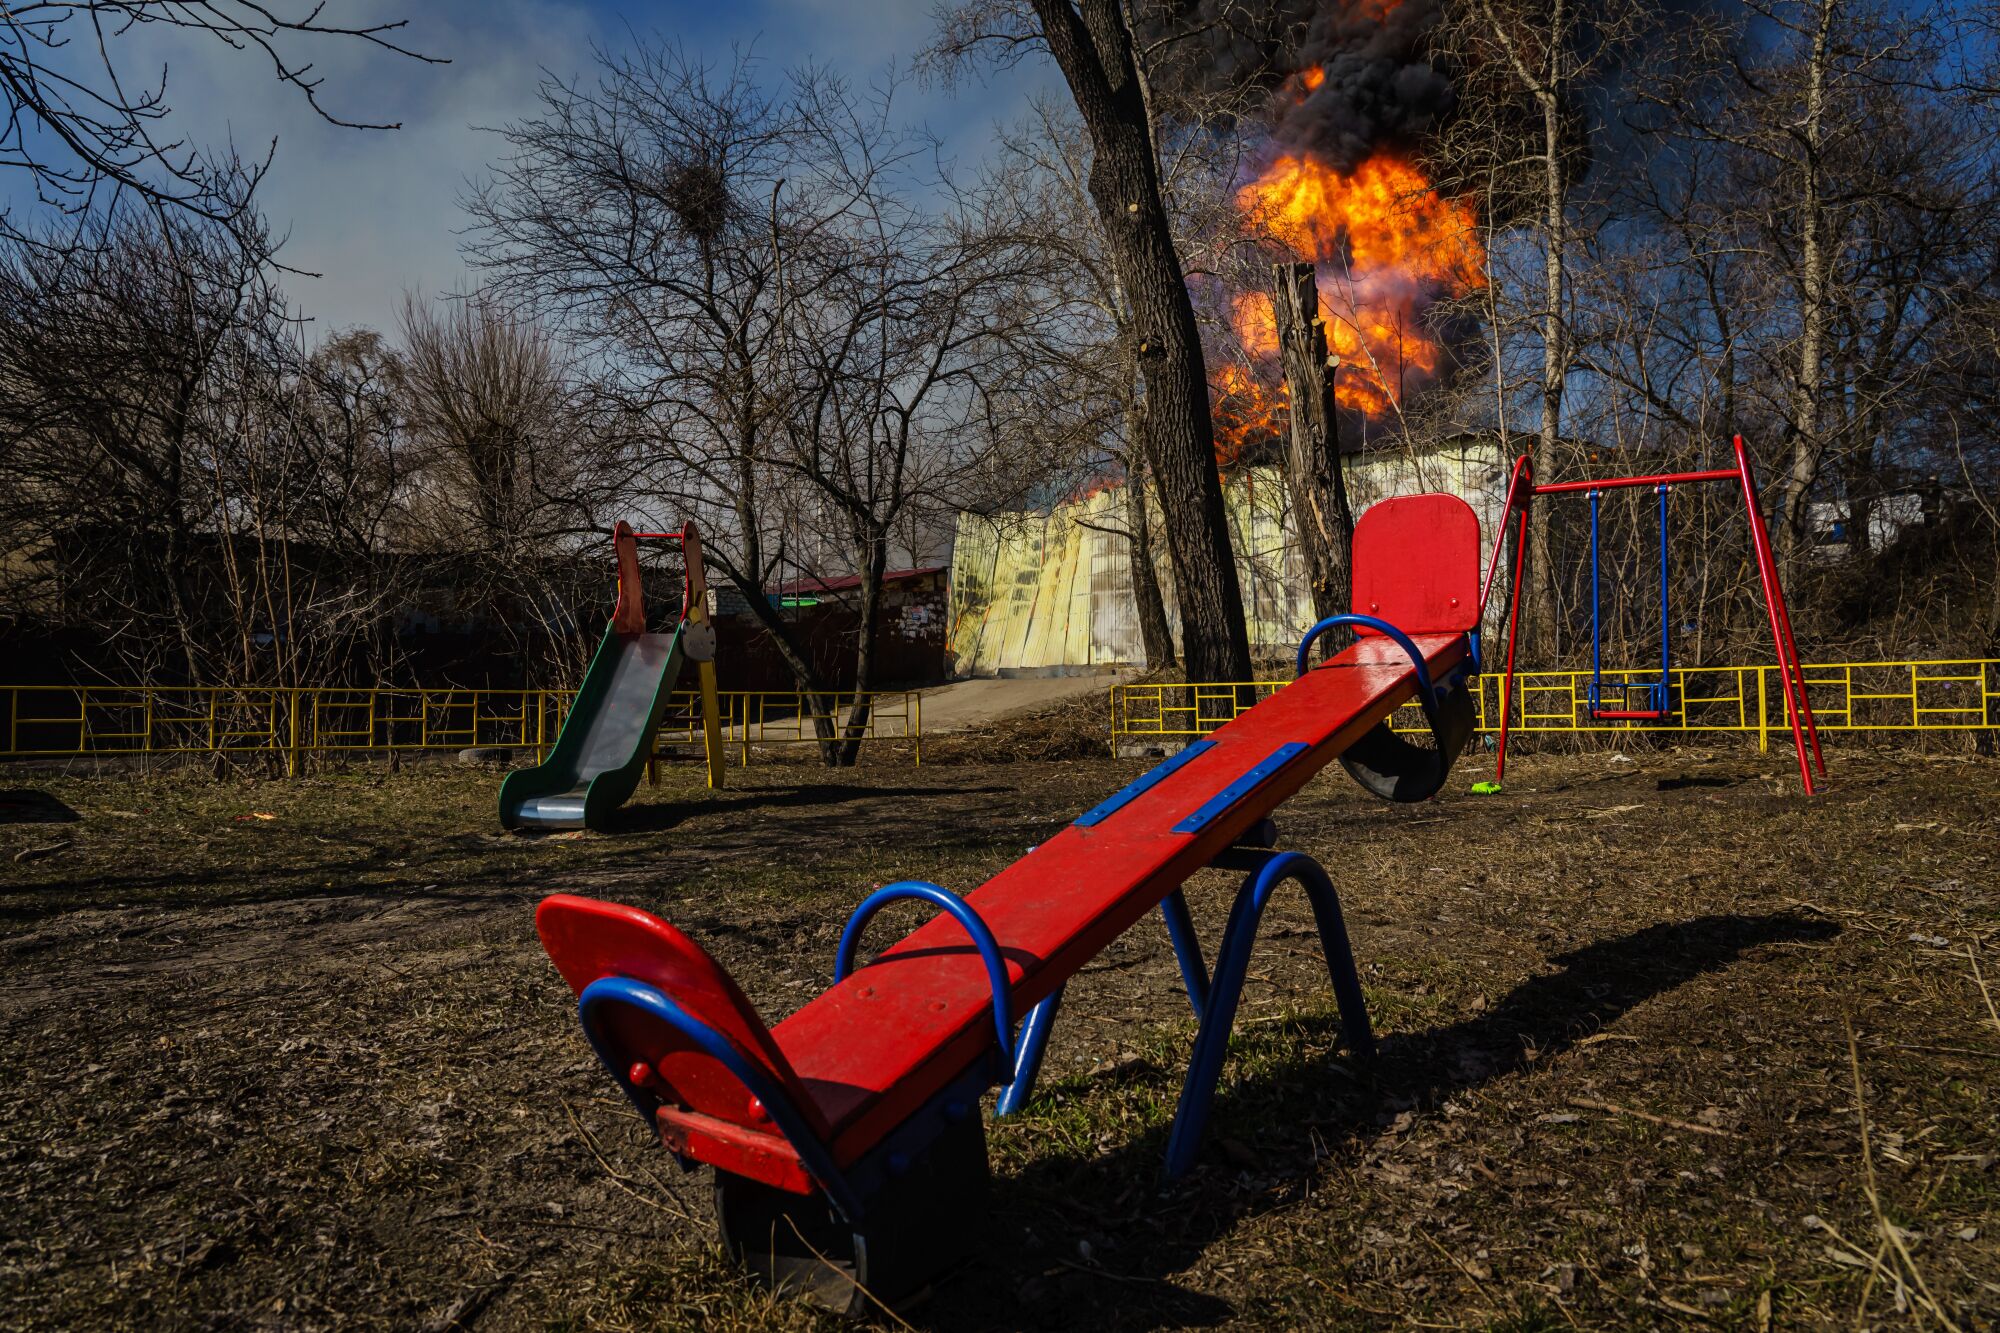 A red seesaw on a playground in the foreground with a building on fire in the background.